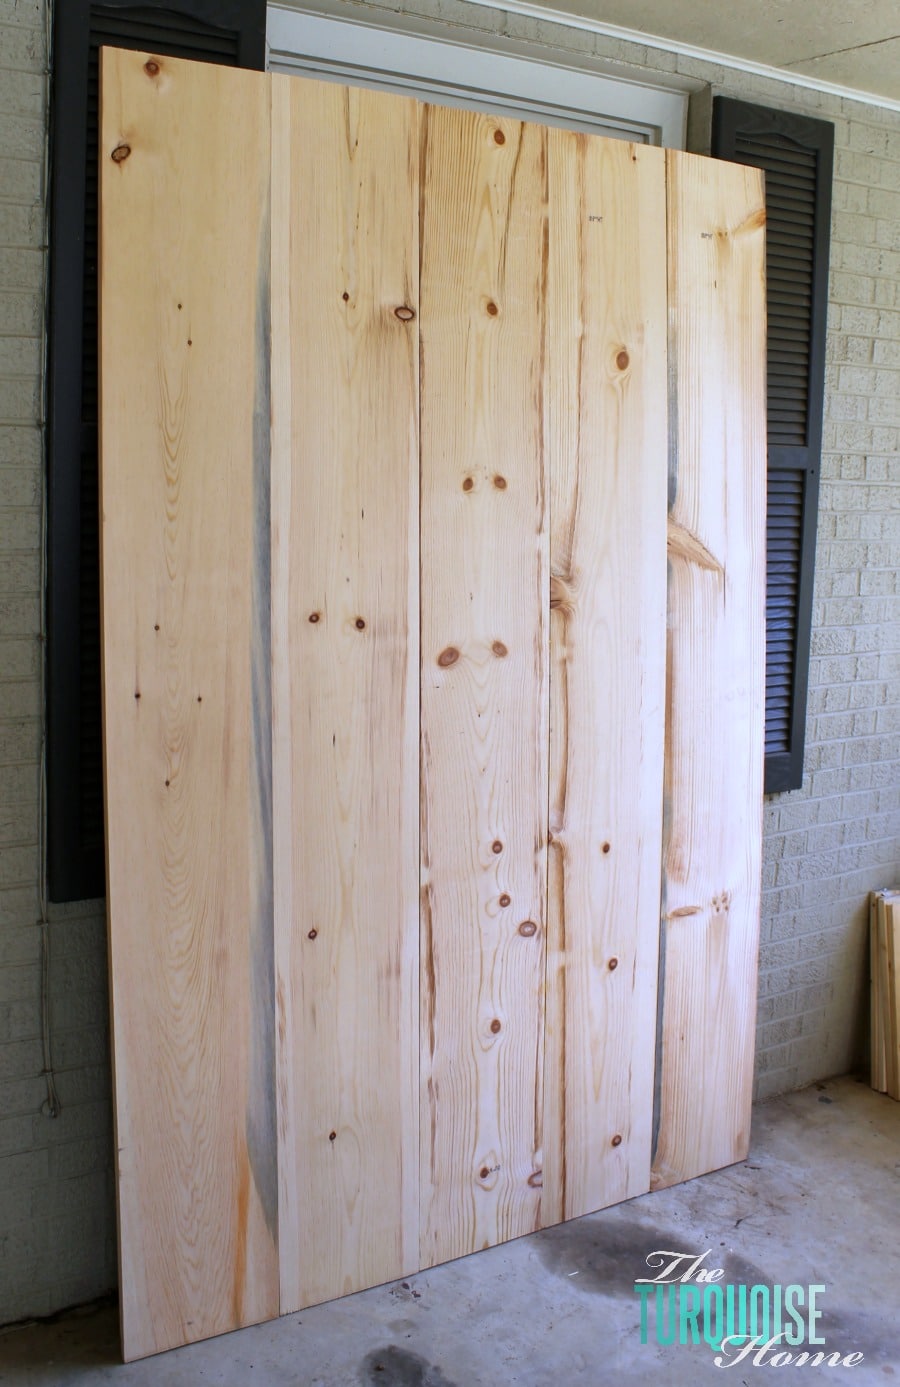 Like I said, building the barn doors were really simple. Although, I 